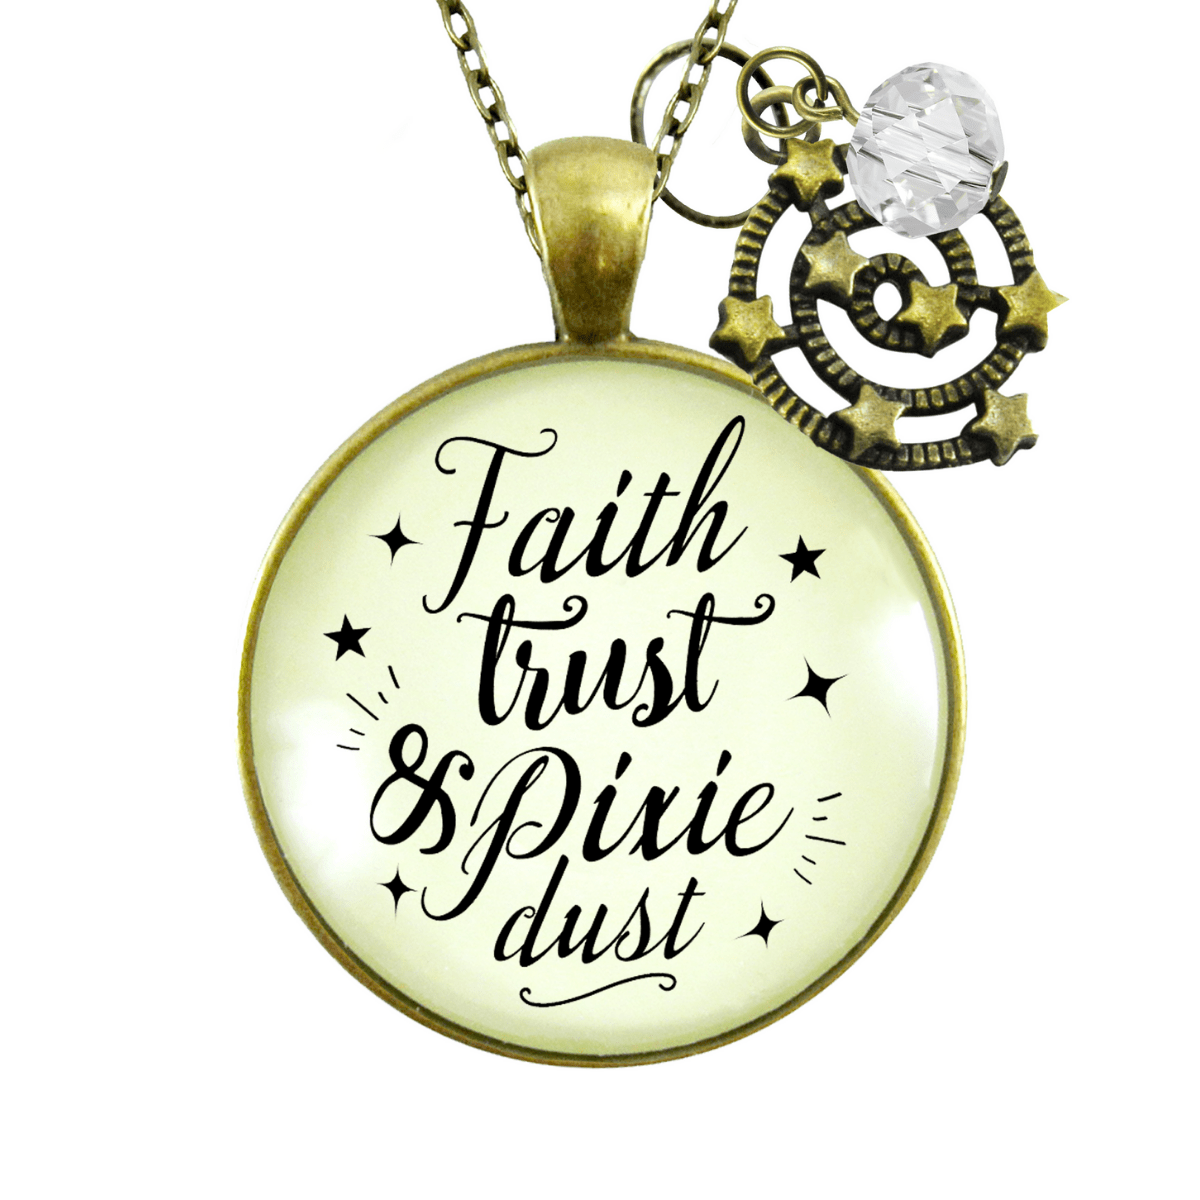 Gutsy Goodness Faith Trust Pixie Dust Fairy Tale Necklace Whimsical Fun Jewelry - Gutsy Goodness Handmade Jewelry;Faith Trust Pixie Dust Fairy Tale Necklace Whimsical Fun Jewelry - Gutsy Goodness Handmade Jewelry Gifts